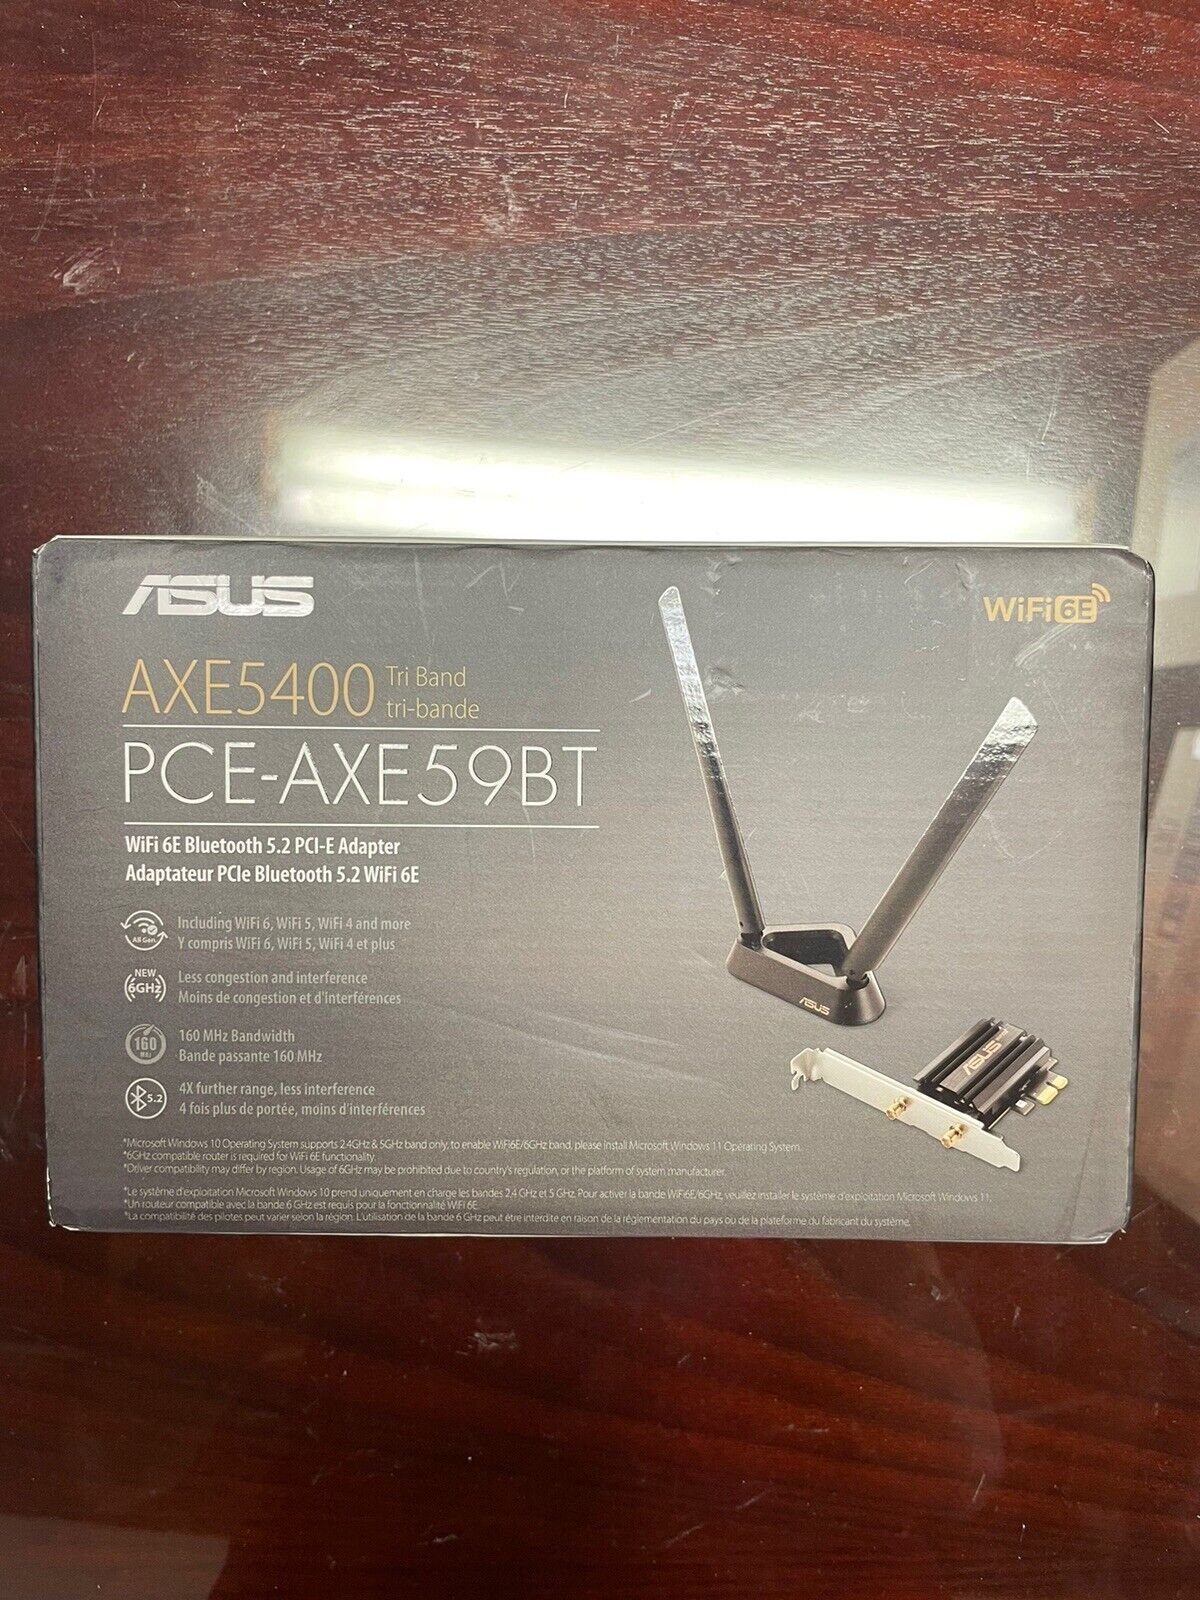 Asus (PCE-AXE59BT) AXE5400 Wi-Fi 6E Tri-Band PCI Express Adapter - Brand New